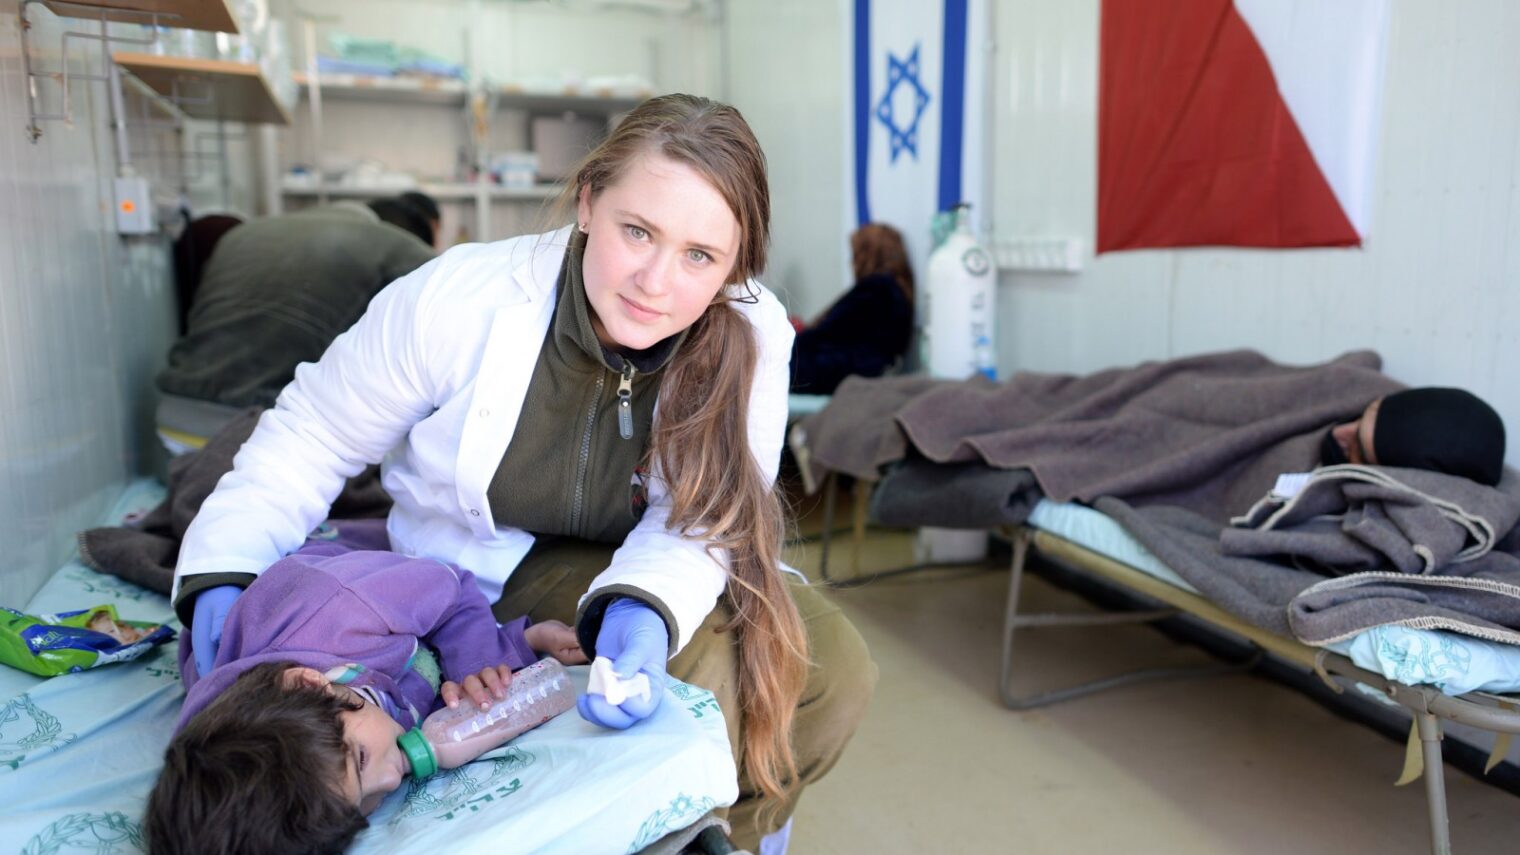 An IDF medic treats an injured Syrian girl at a field hospital in northern Israel. Photo by GPO